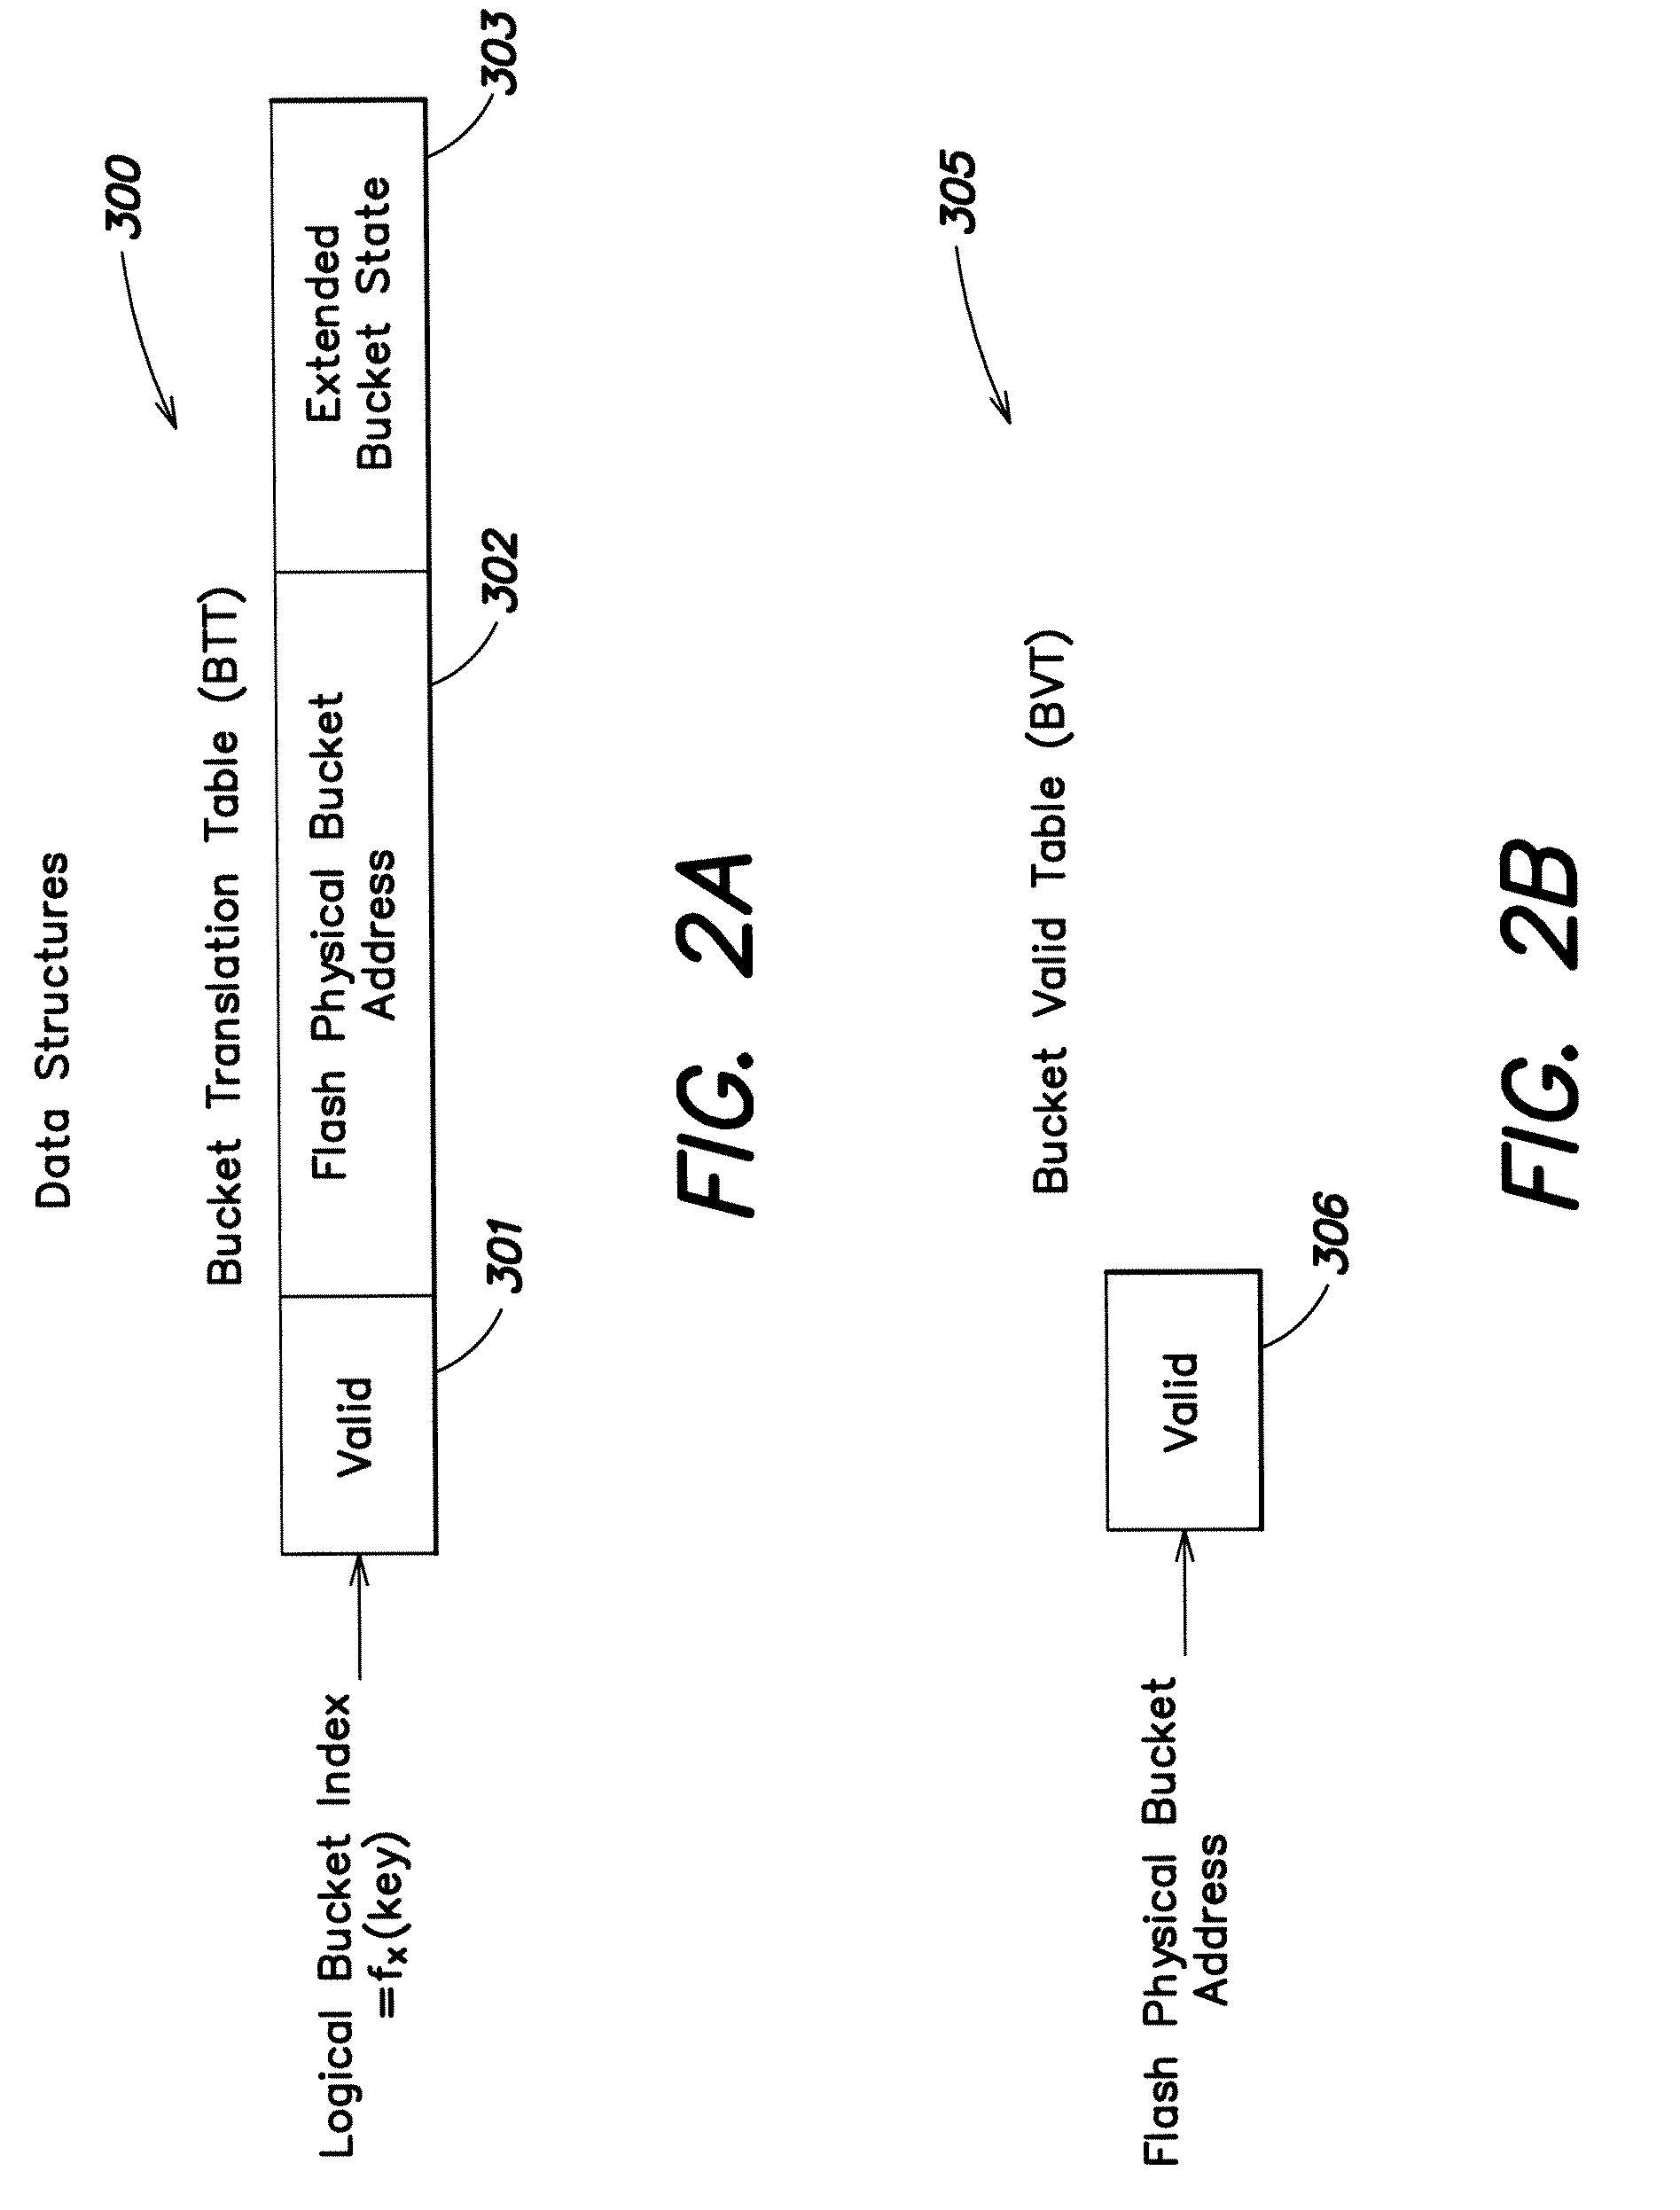 Method of adapting a uniform access indexing process to a non-uniform access memory, and computer system